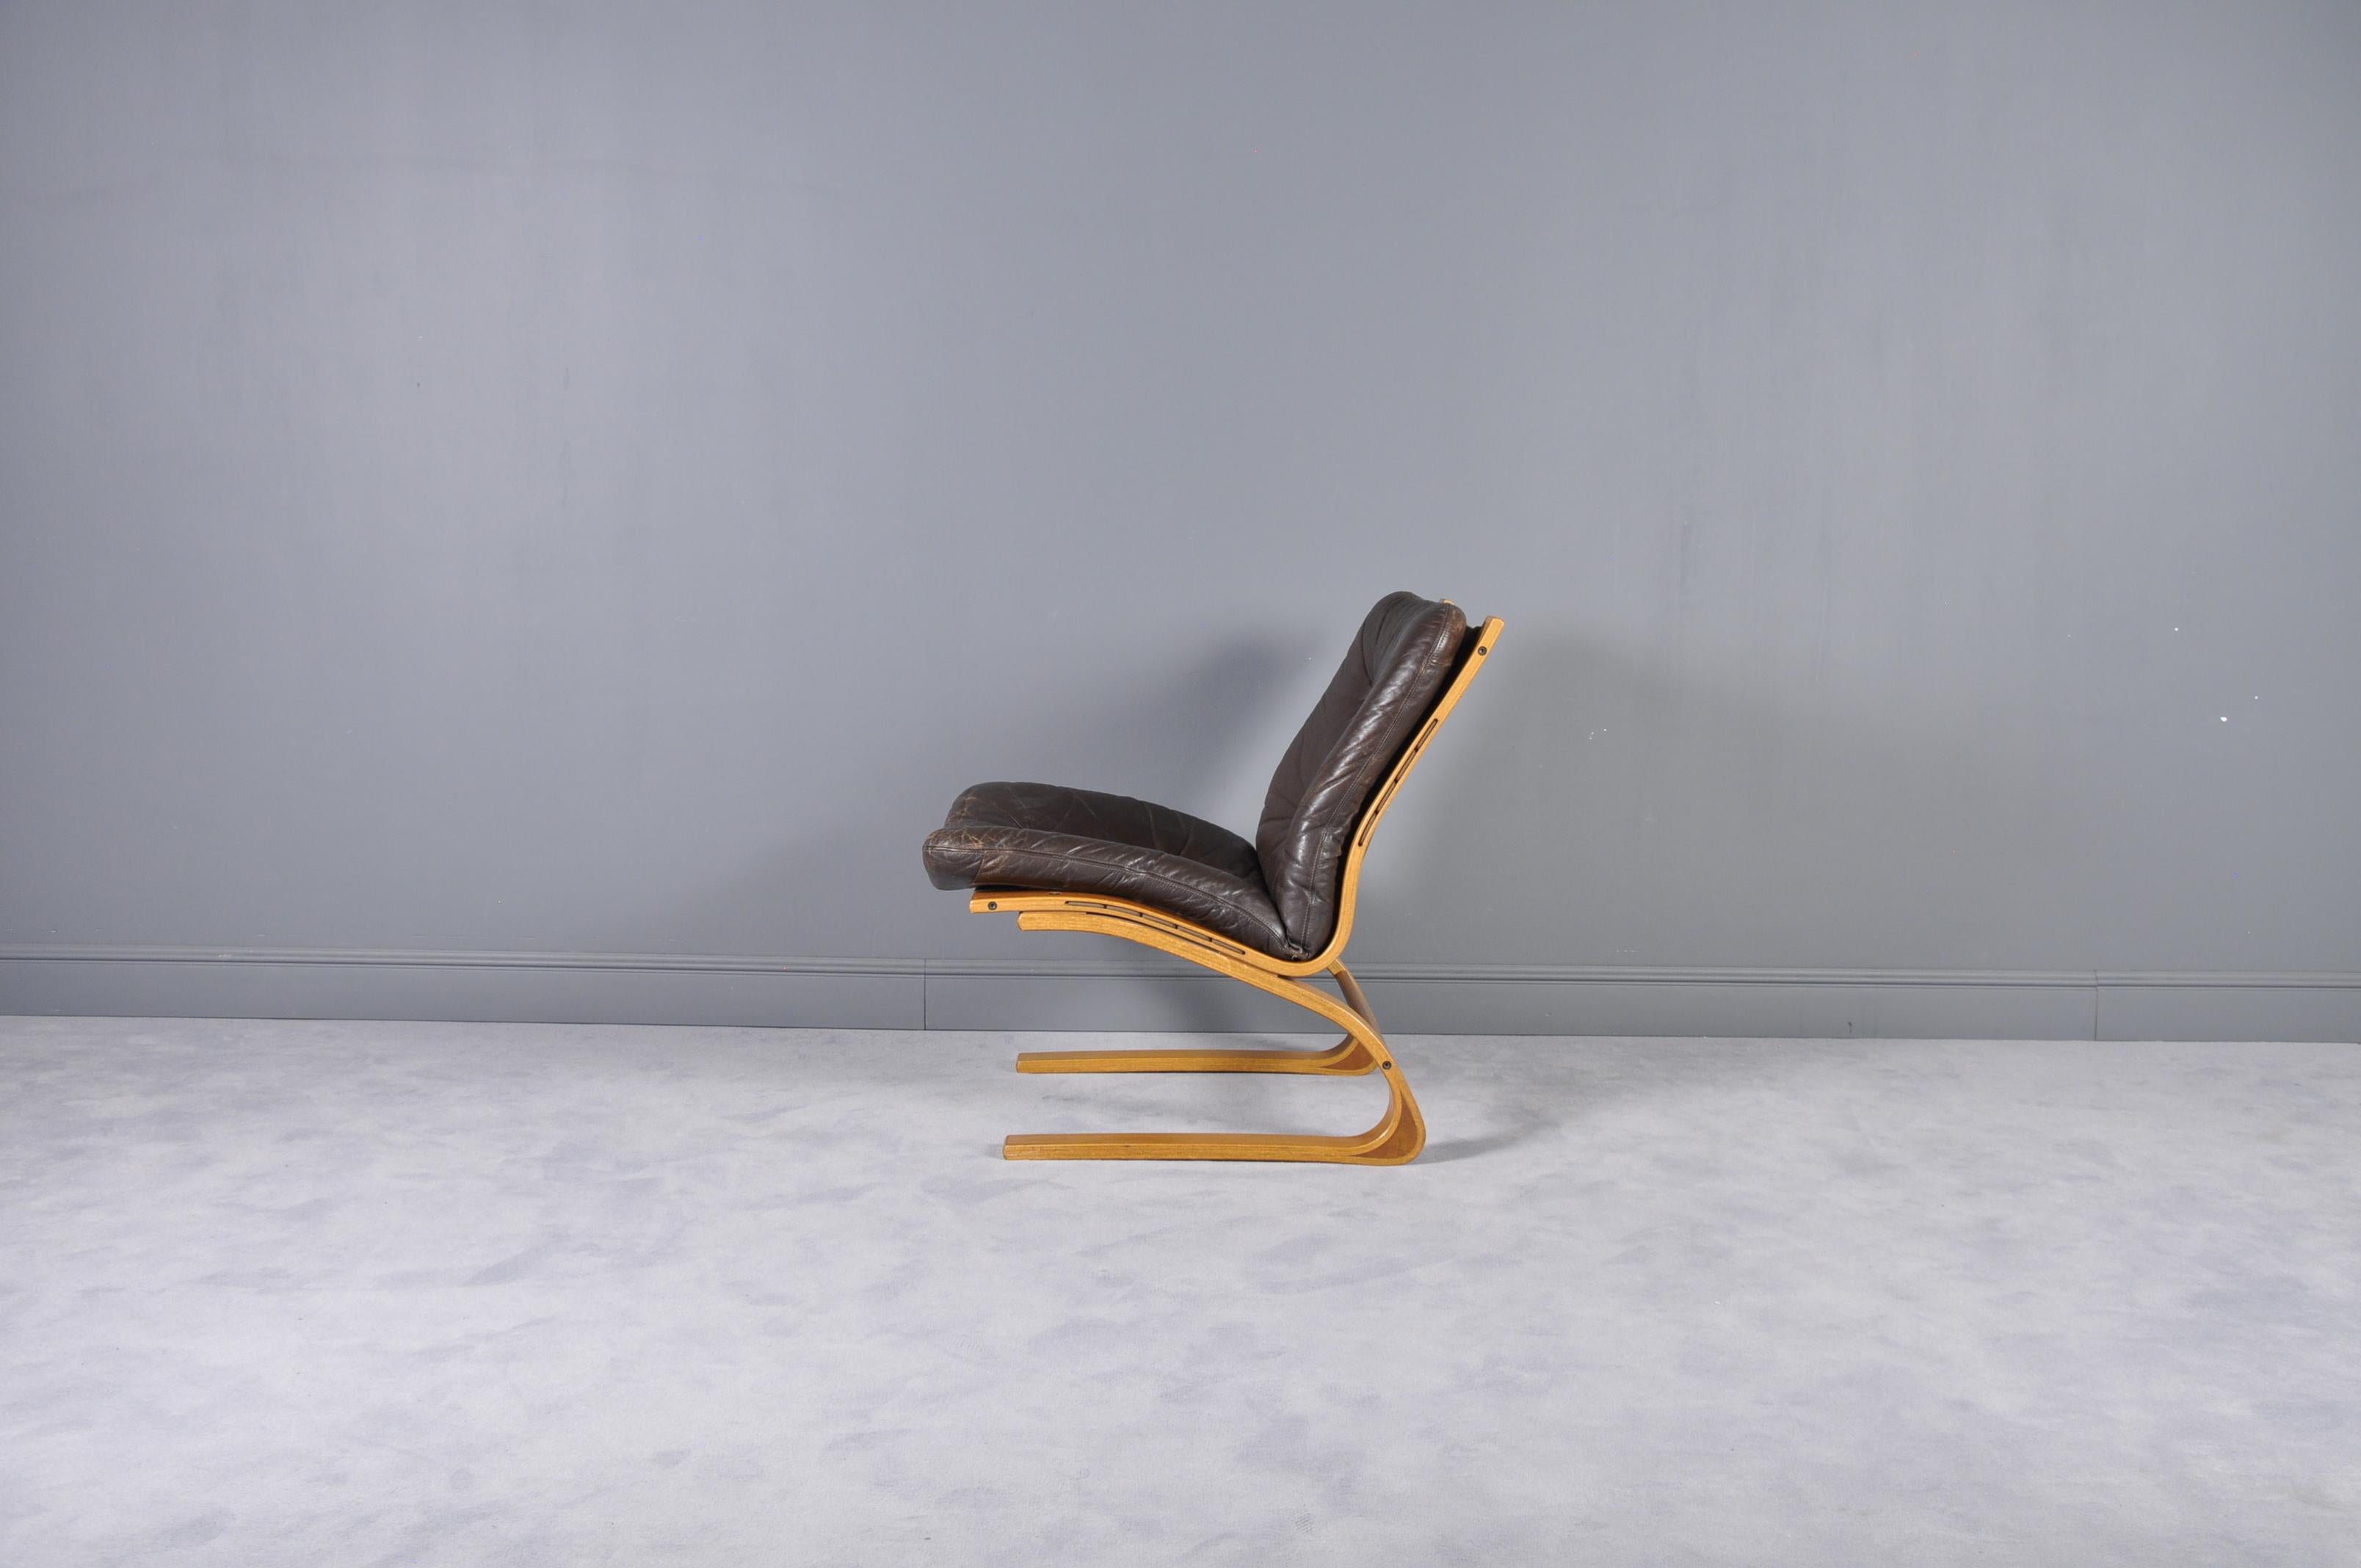 This Norwegian easy chair it's designed by Elsa & Nordahl Solheim for Rybo Rykken Furniture & Co. in 1976. The chair it's very comfortable and is made from bentwood and real brown leather.